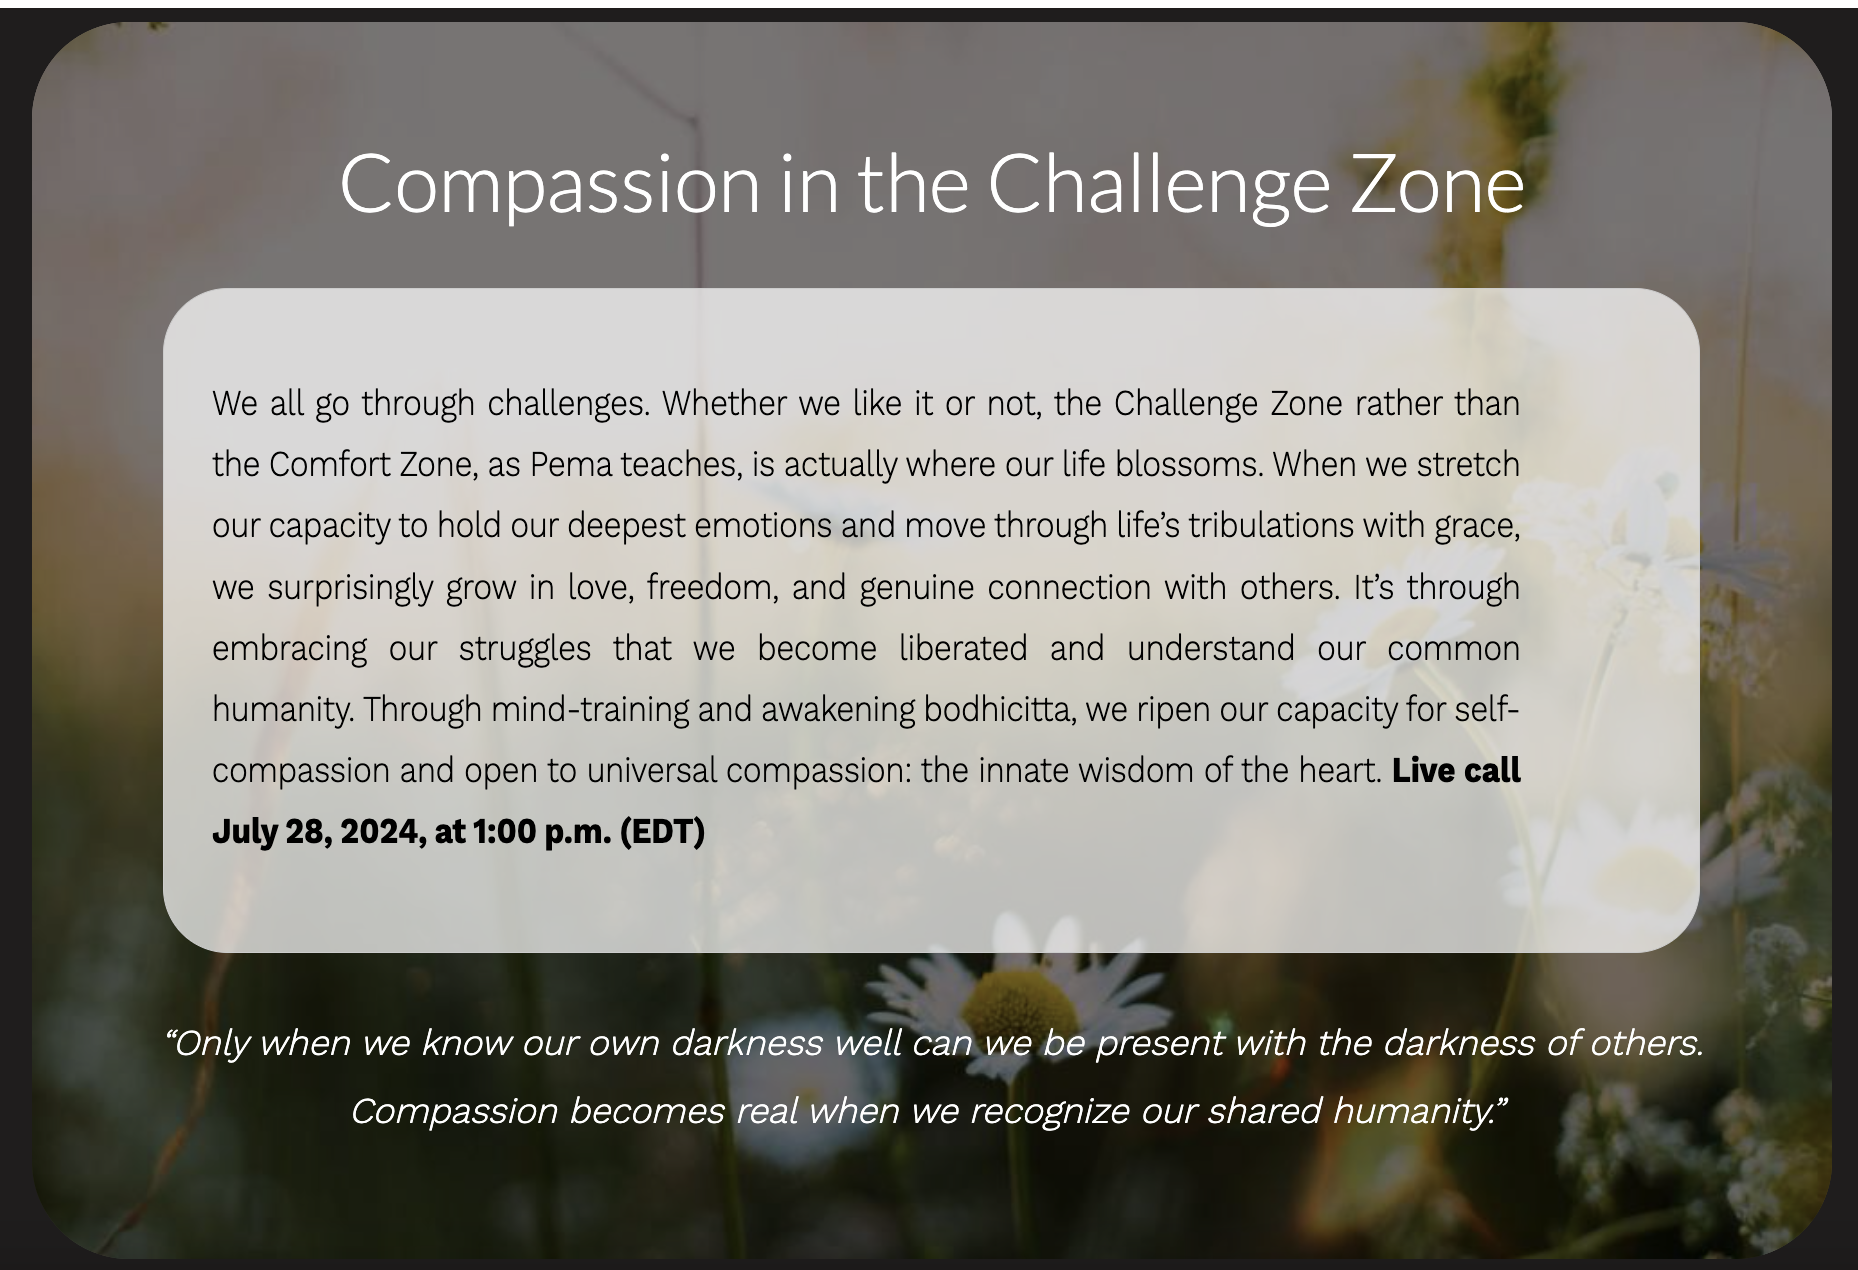 Compassion in the Challenge Zone